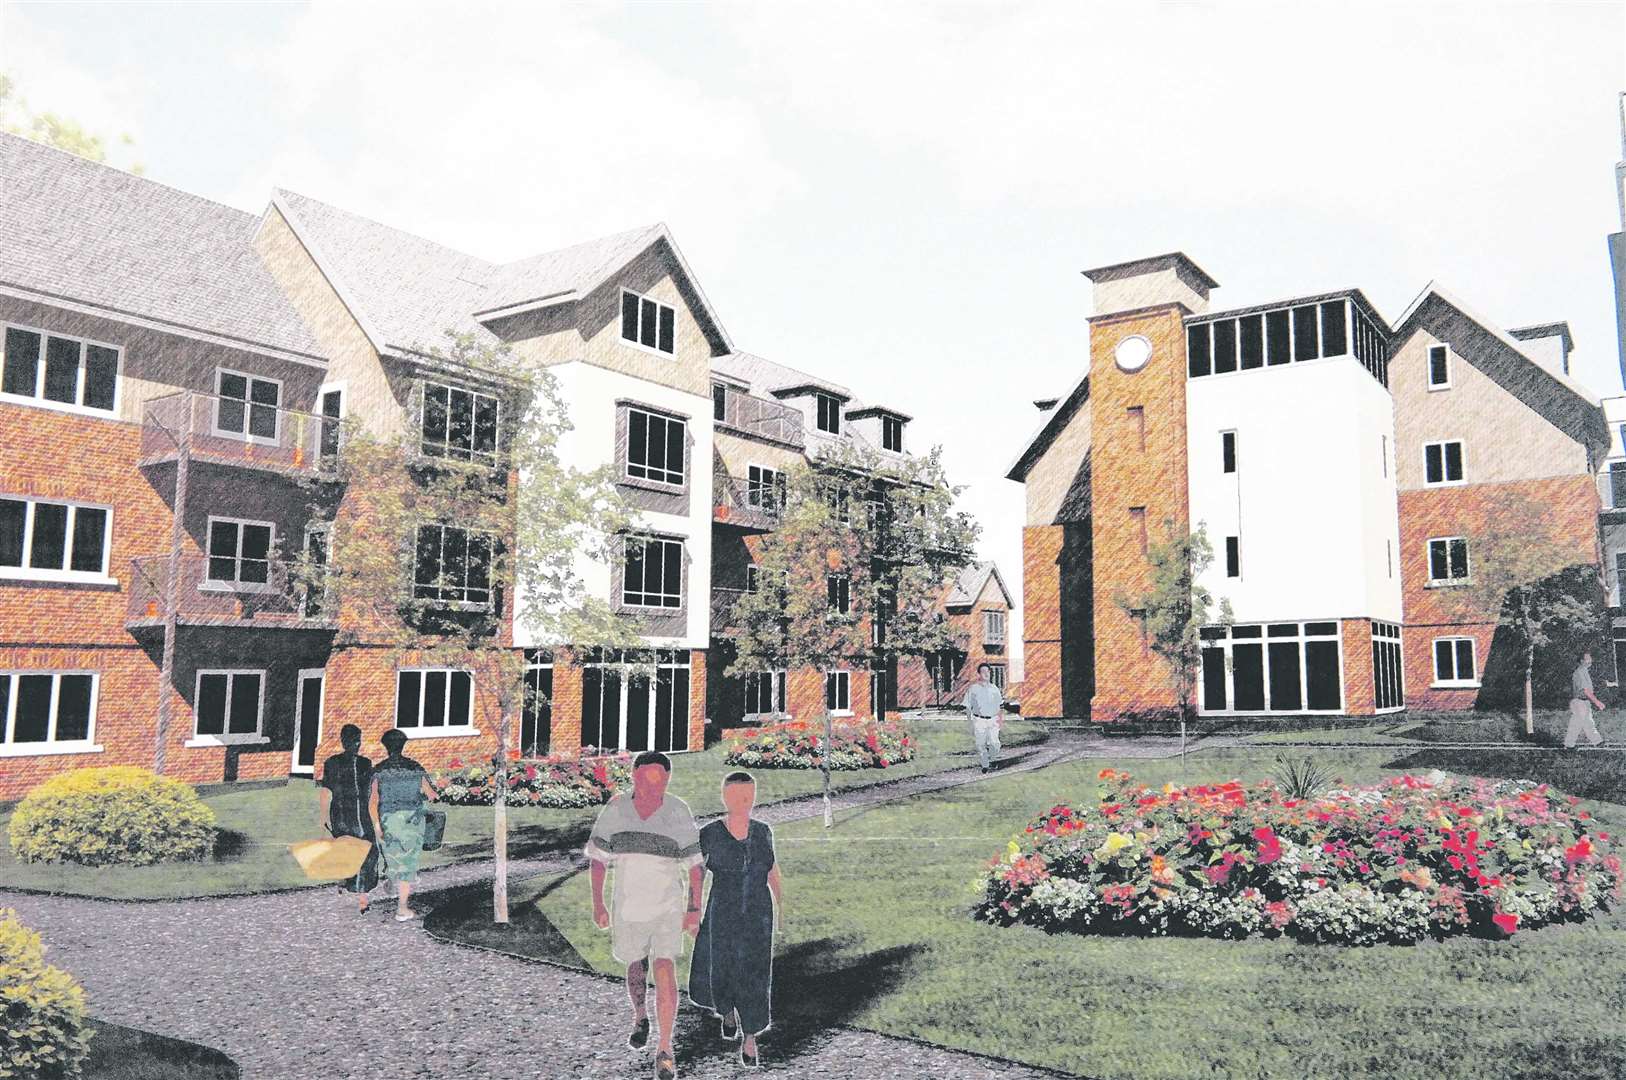 CGI of the buildings around the central courtyard area at the proposed Herne Bay Court development